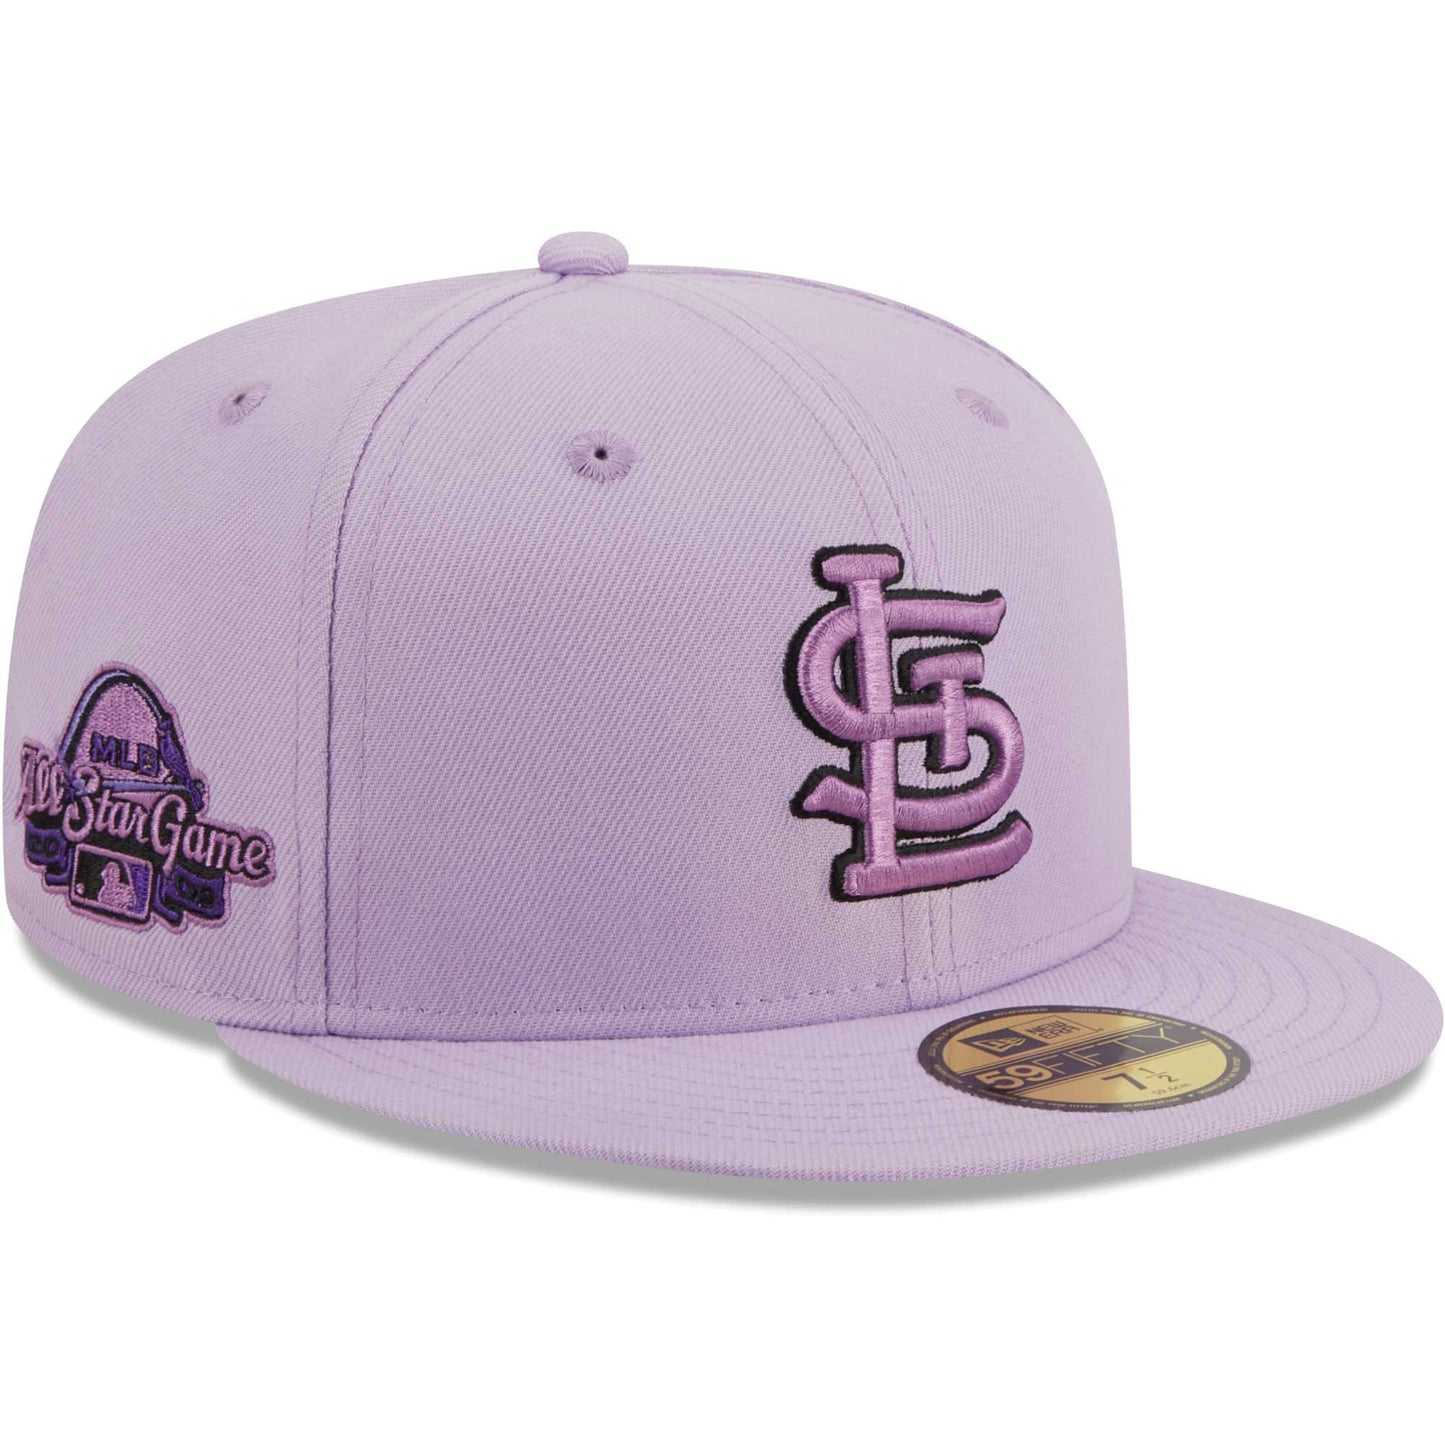 St. Louis Cardinals New Era 59FIFTY Fitted Hat - Lavender